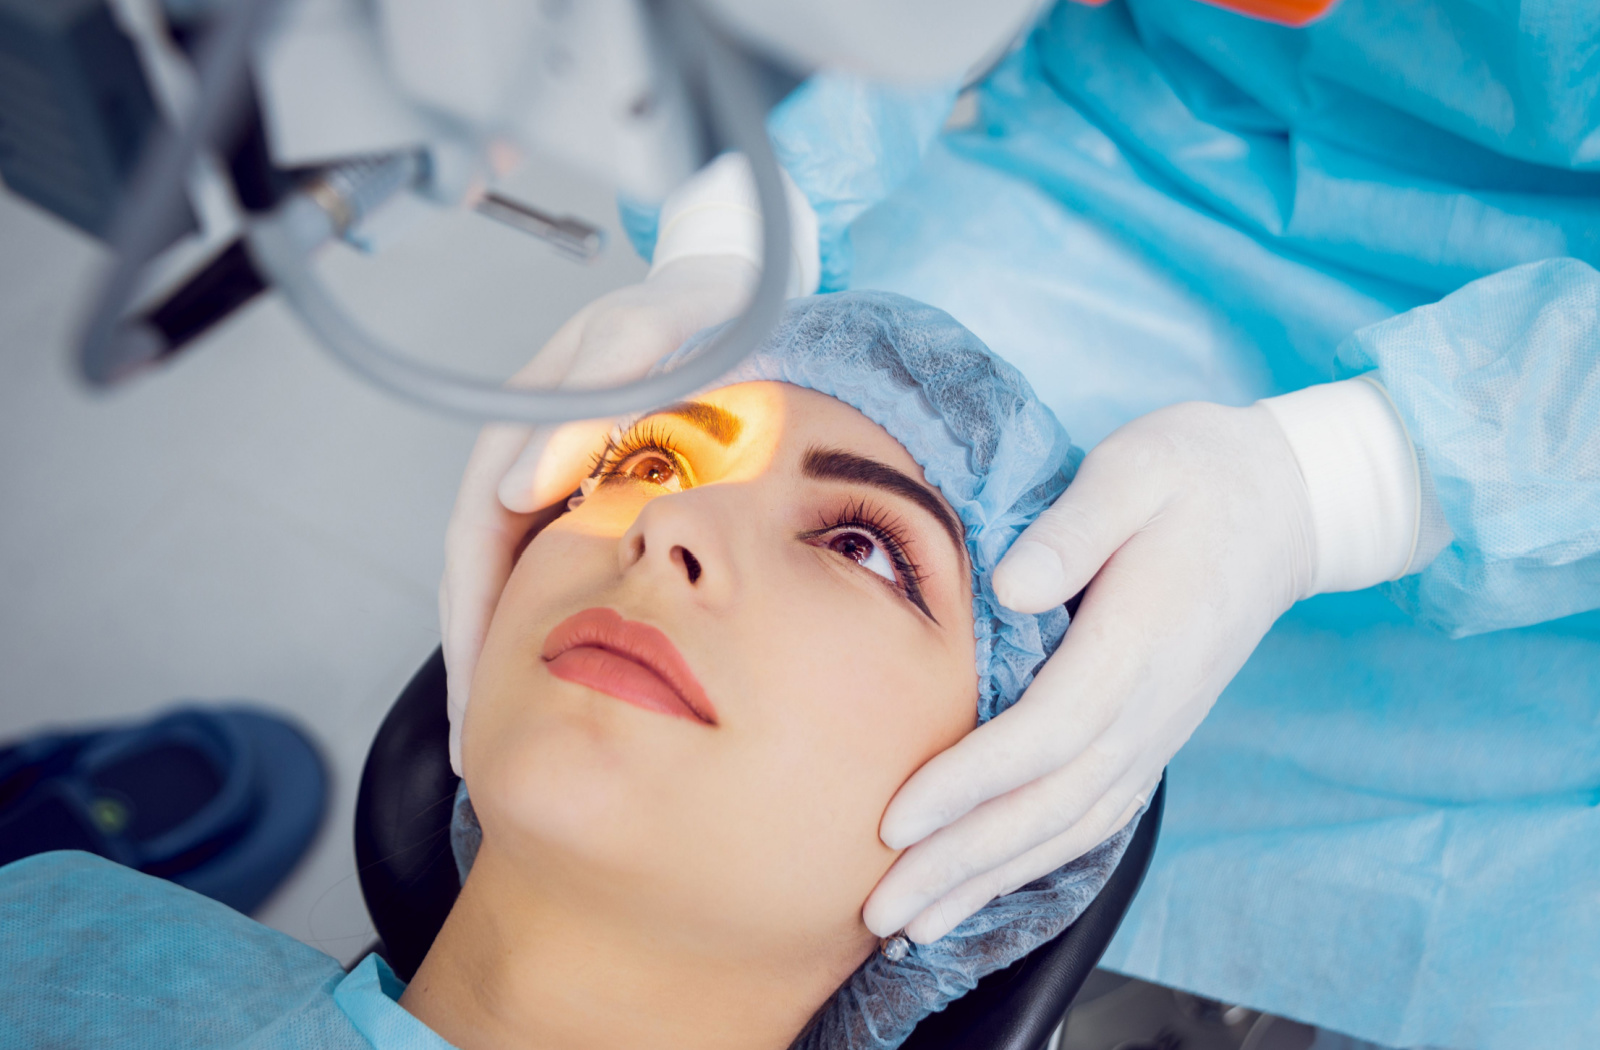 A woman and her eye surgeon preparing for laser eye surgery